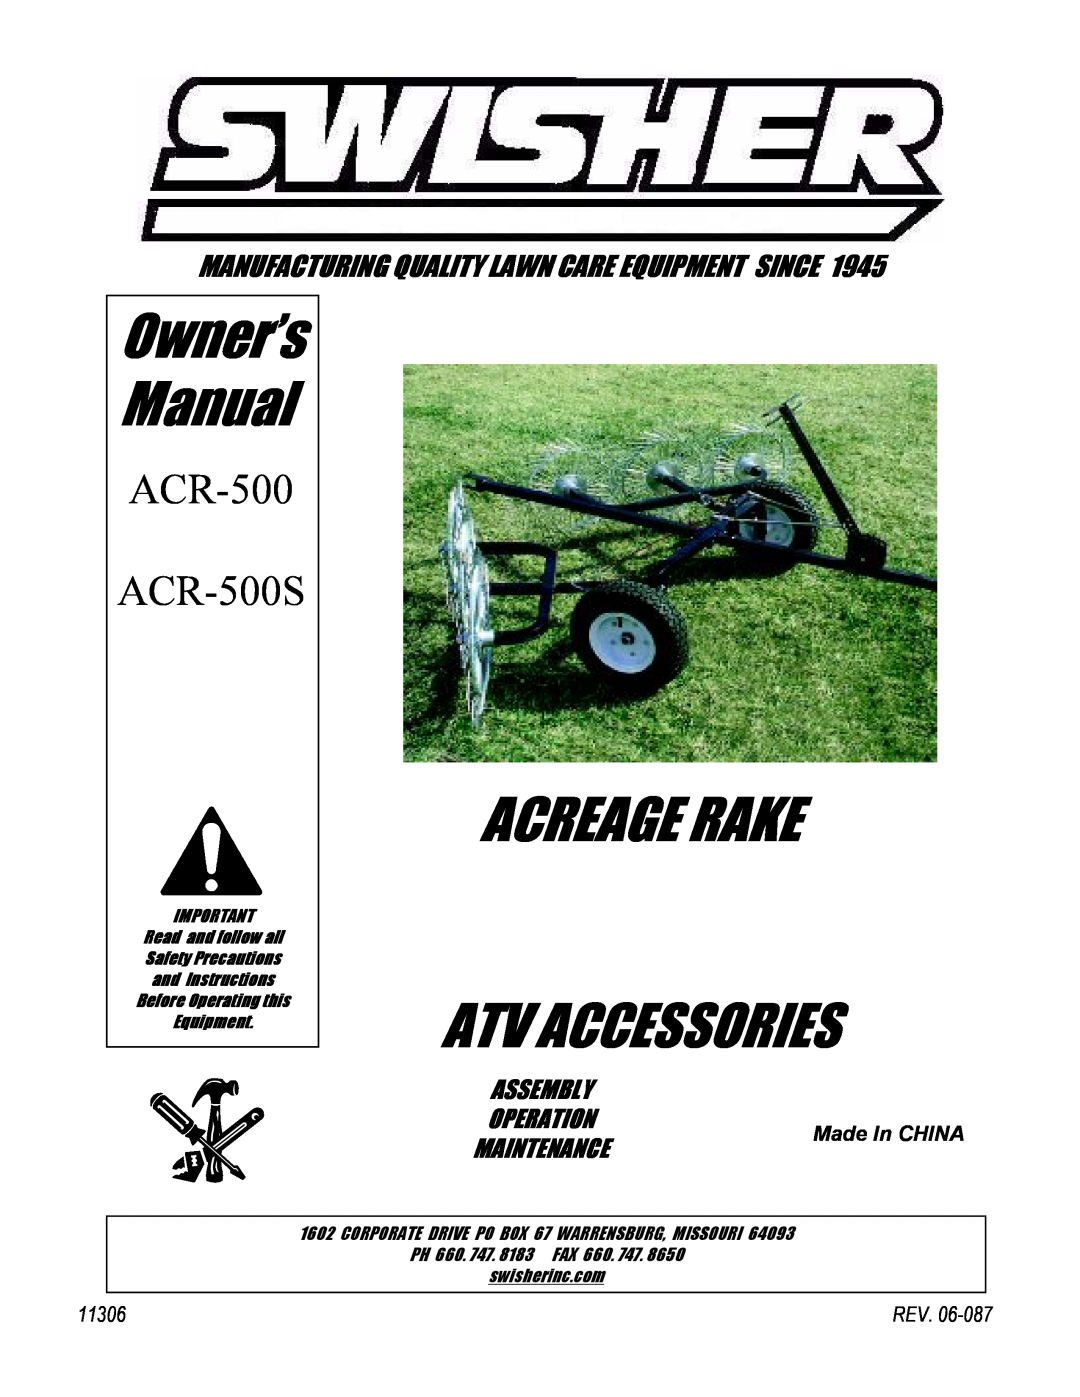 Swisher ACR-500, ACR-500S owner manual Acreage Rake Atv Accessories, Manufacturing Quality Lawn Care Equipment Since, Rev 